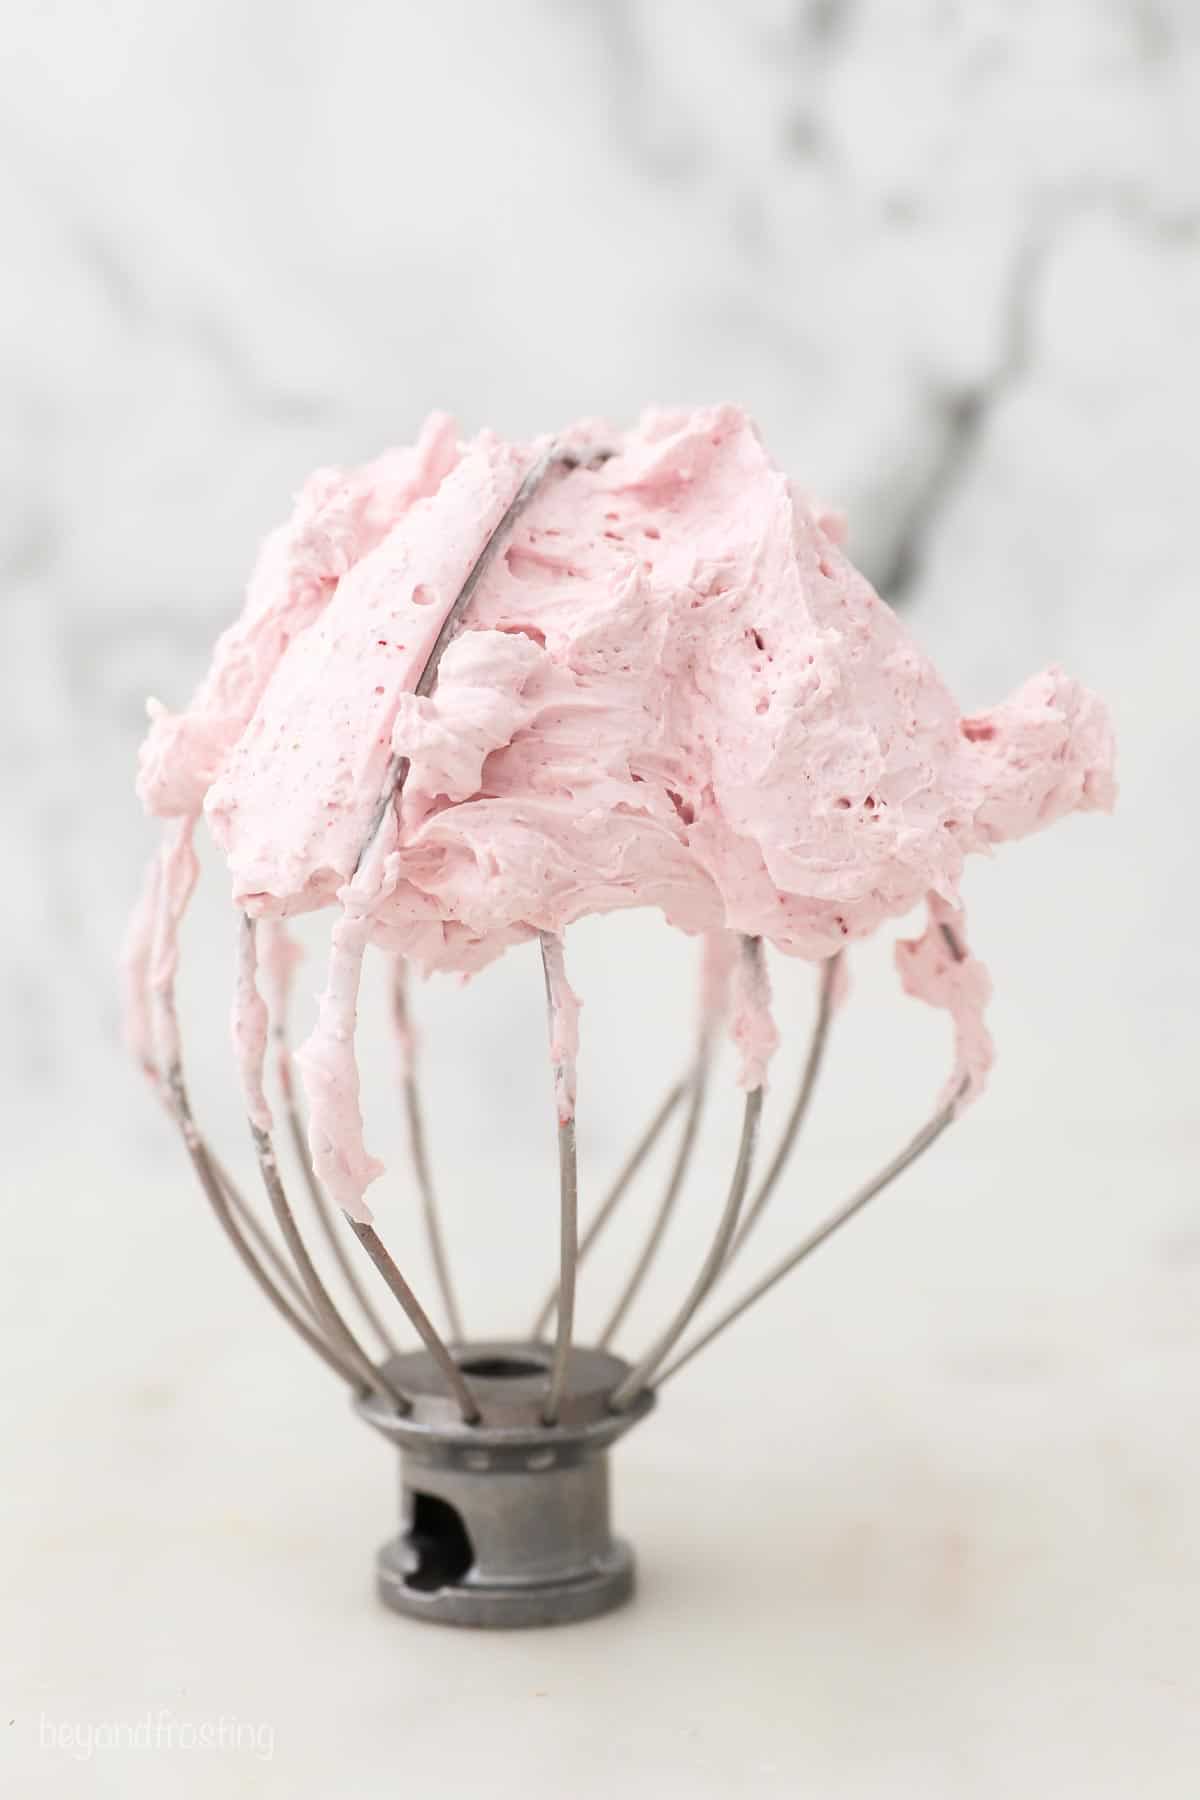 Easy Strawberry Whipped Cream | Beyond Frosting